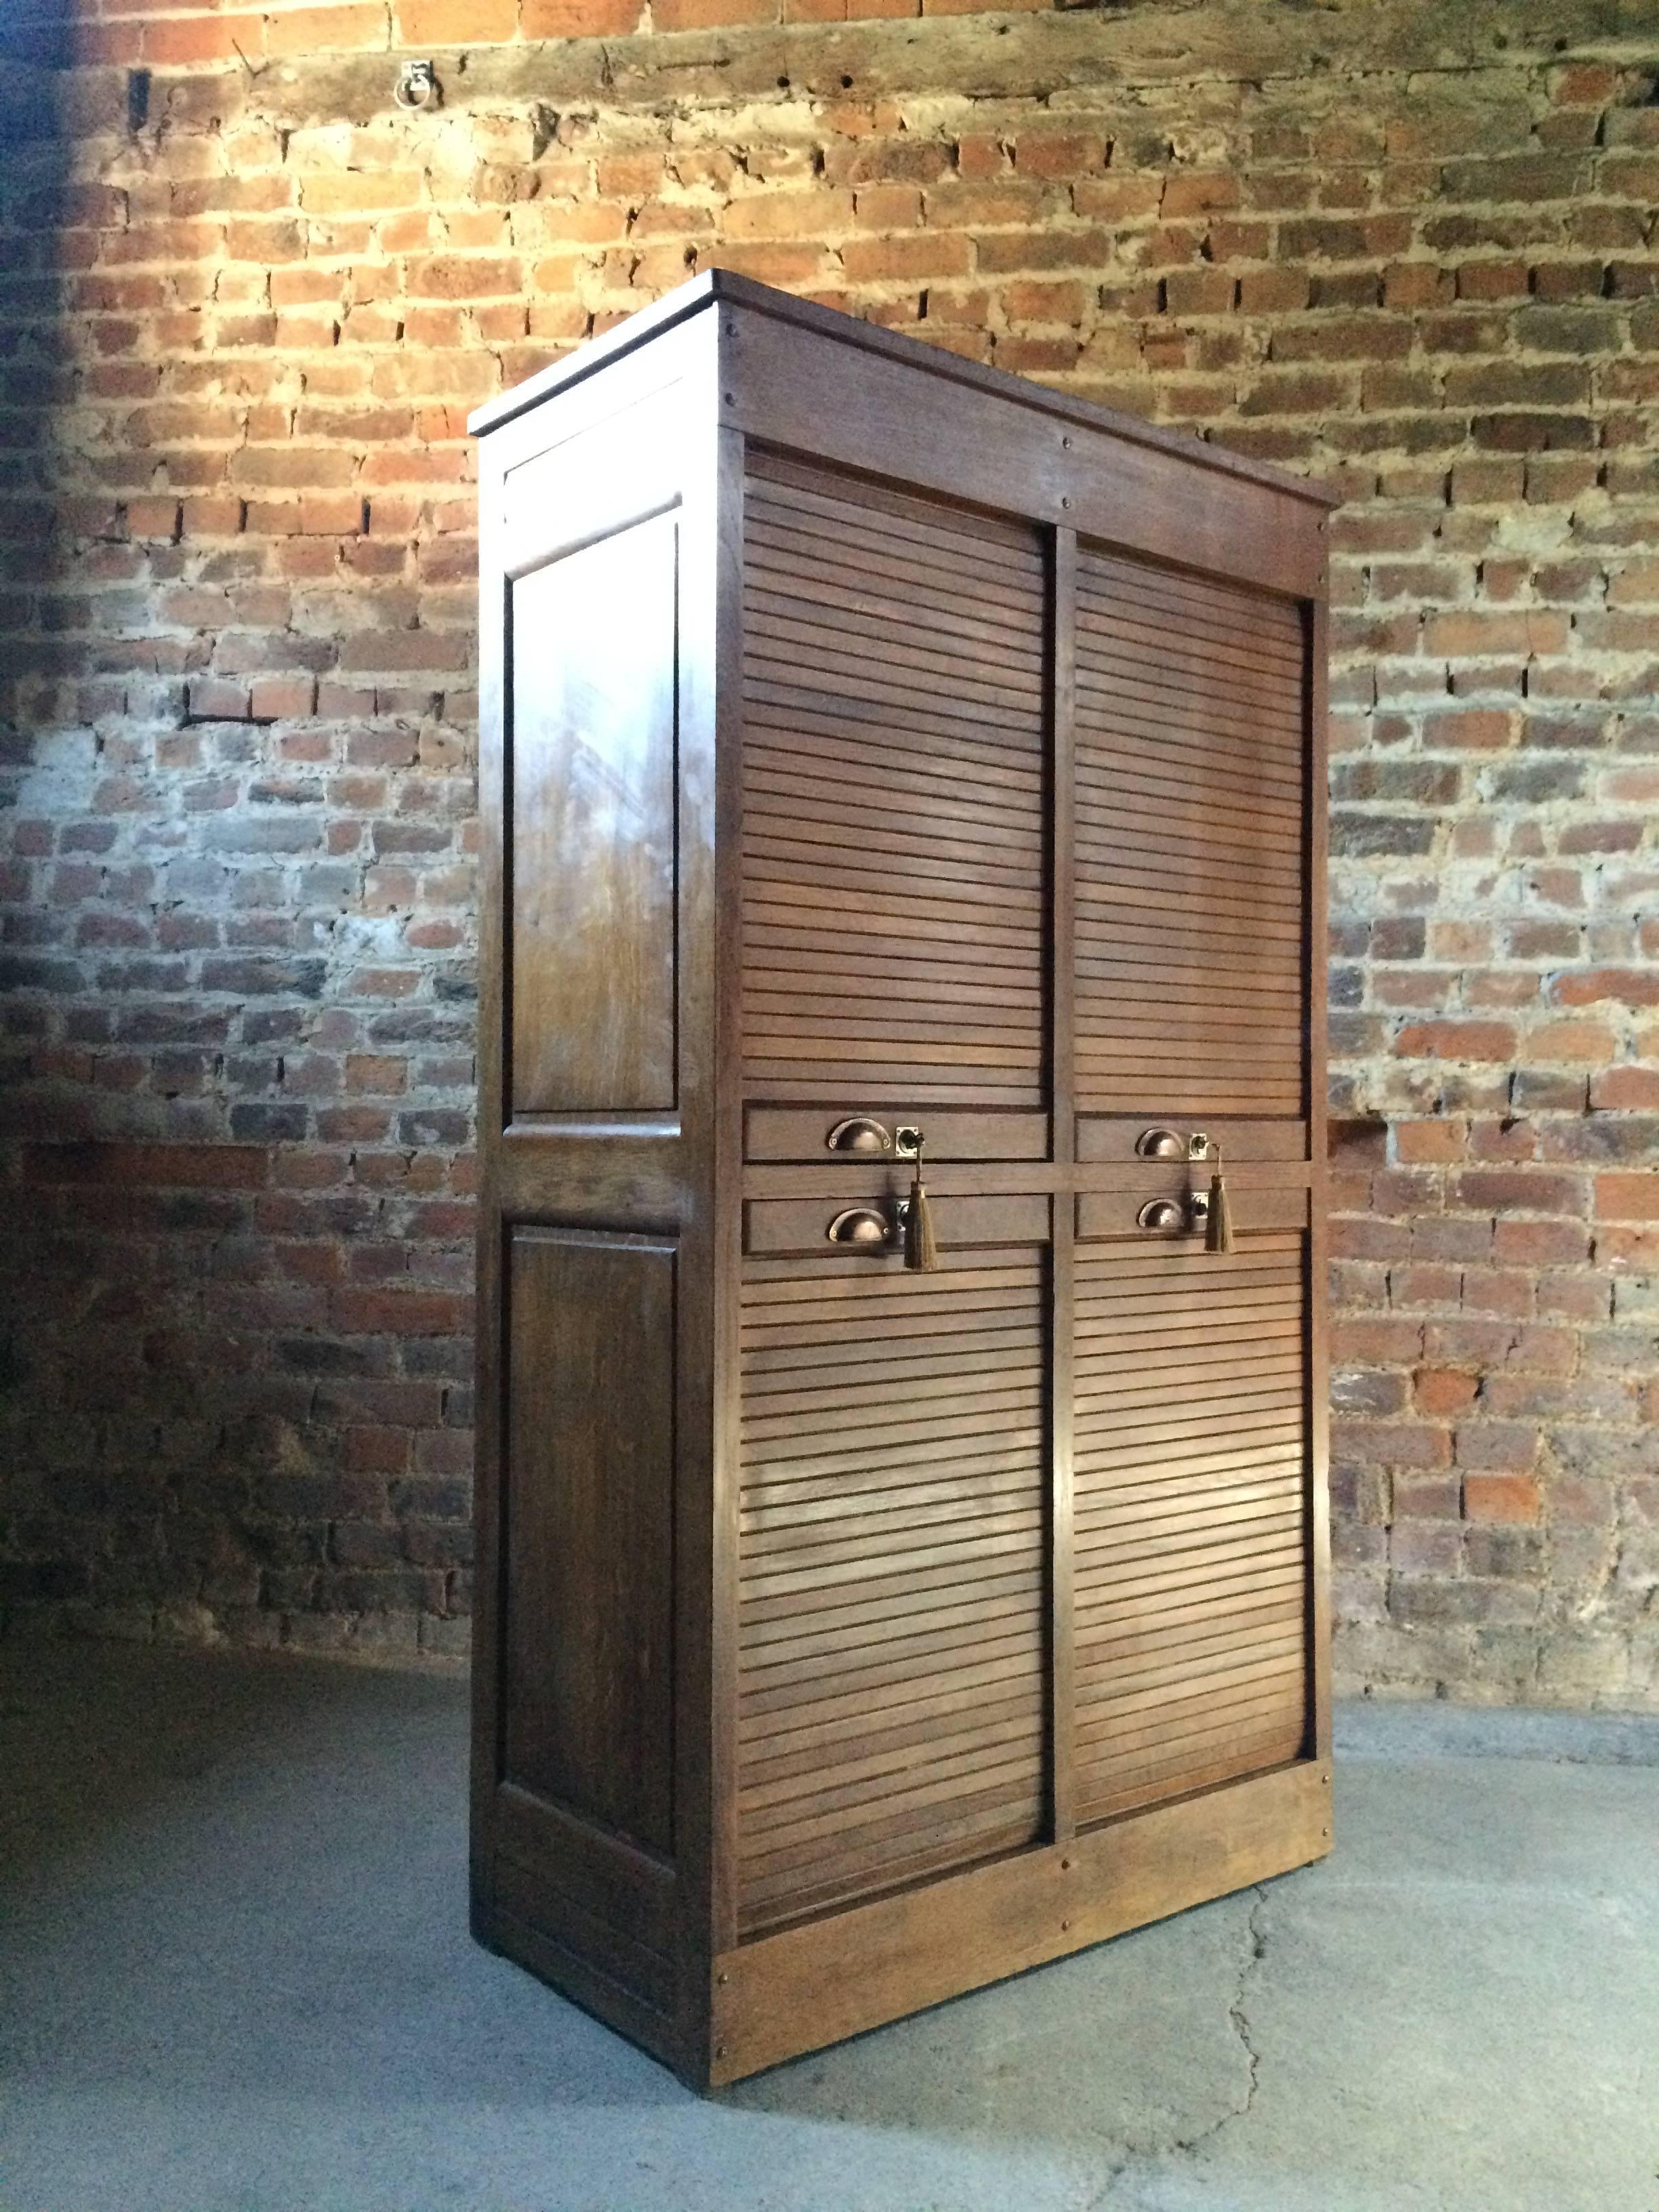 Haberdashery Tambour Fronted Oak Cabinet Four-Section Vintage 1